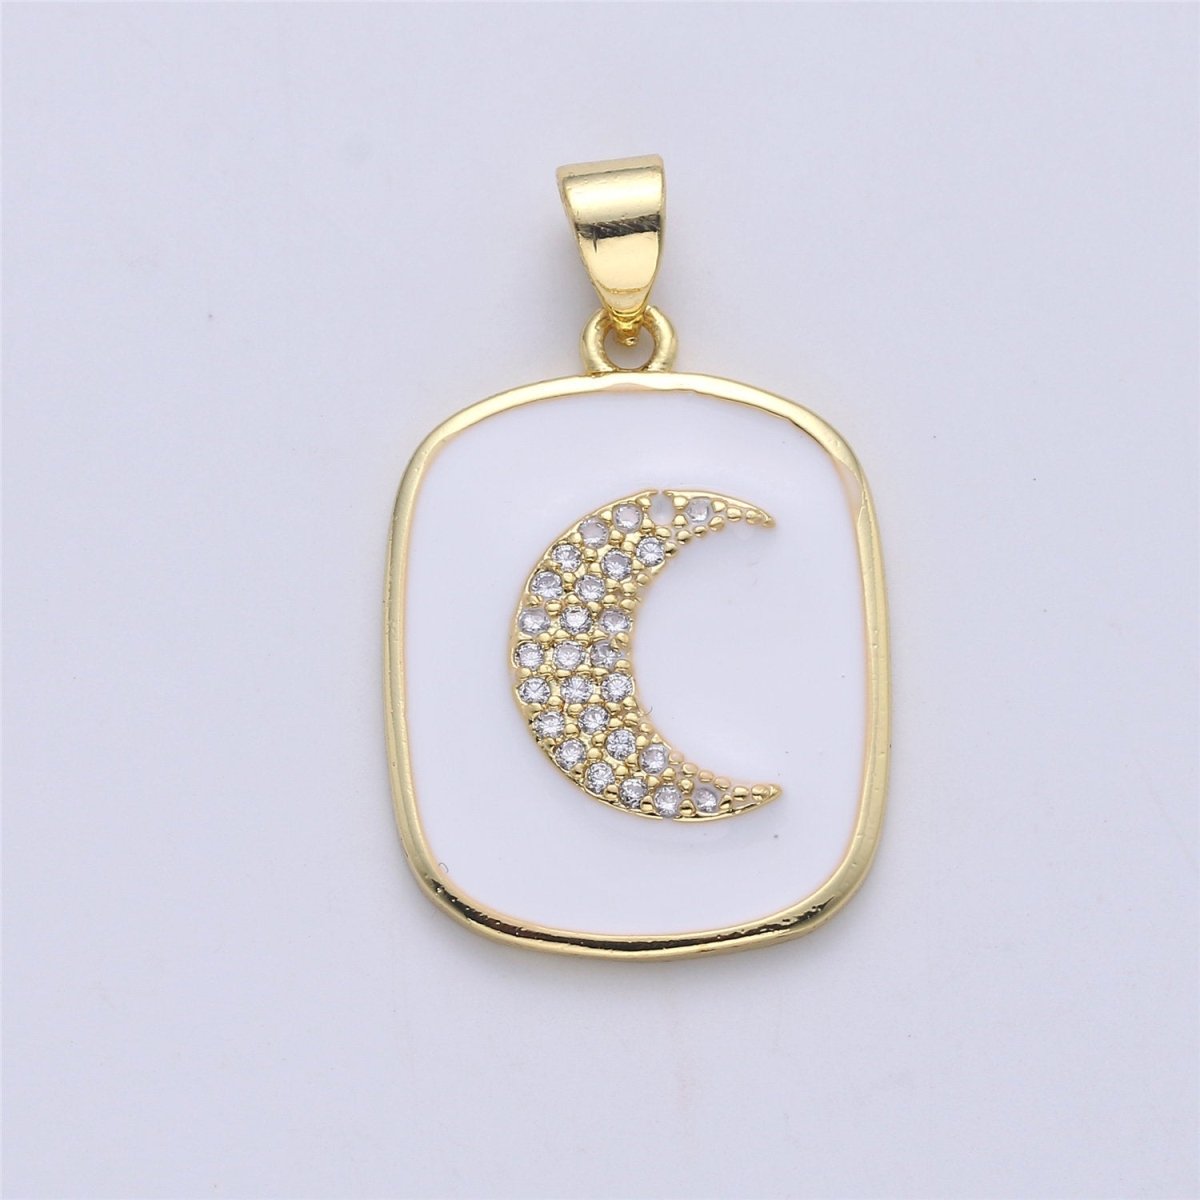 Gold Enamel Moon Charm Military Tag Pendant, Black White Celestial Charm, Enamel Jewelry for Necklace Component I-450 I-451 - DLUXCA